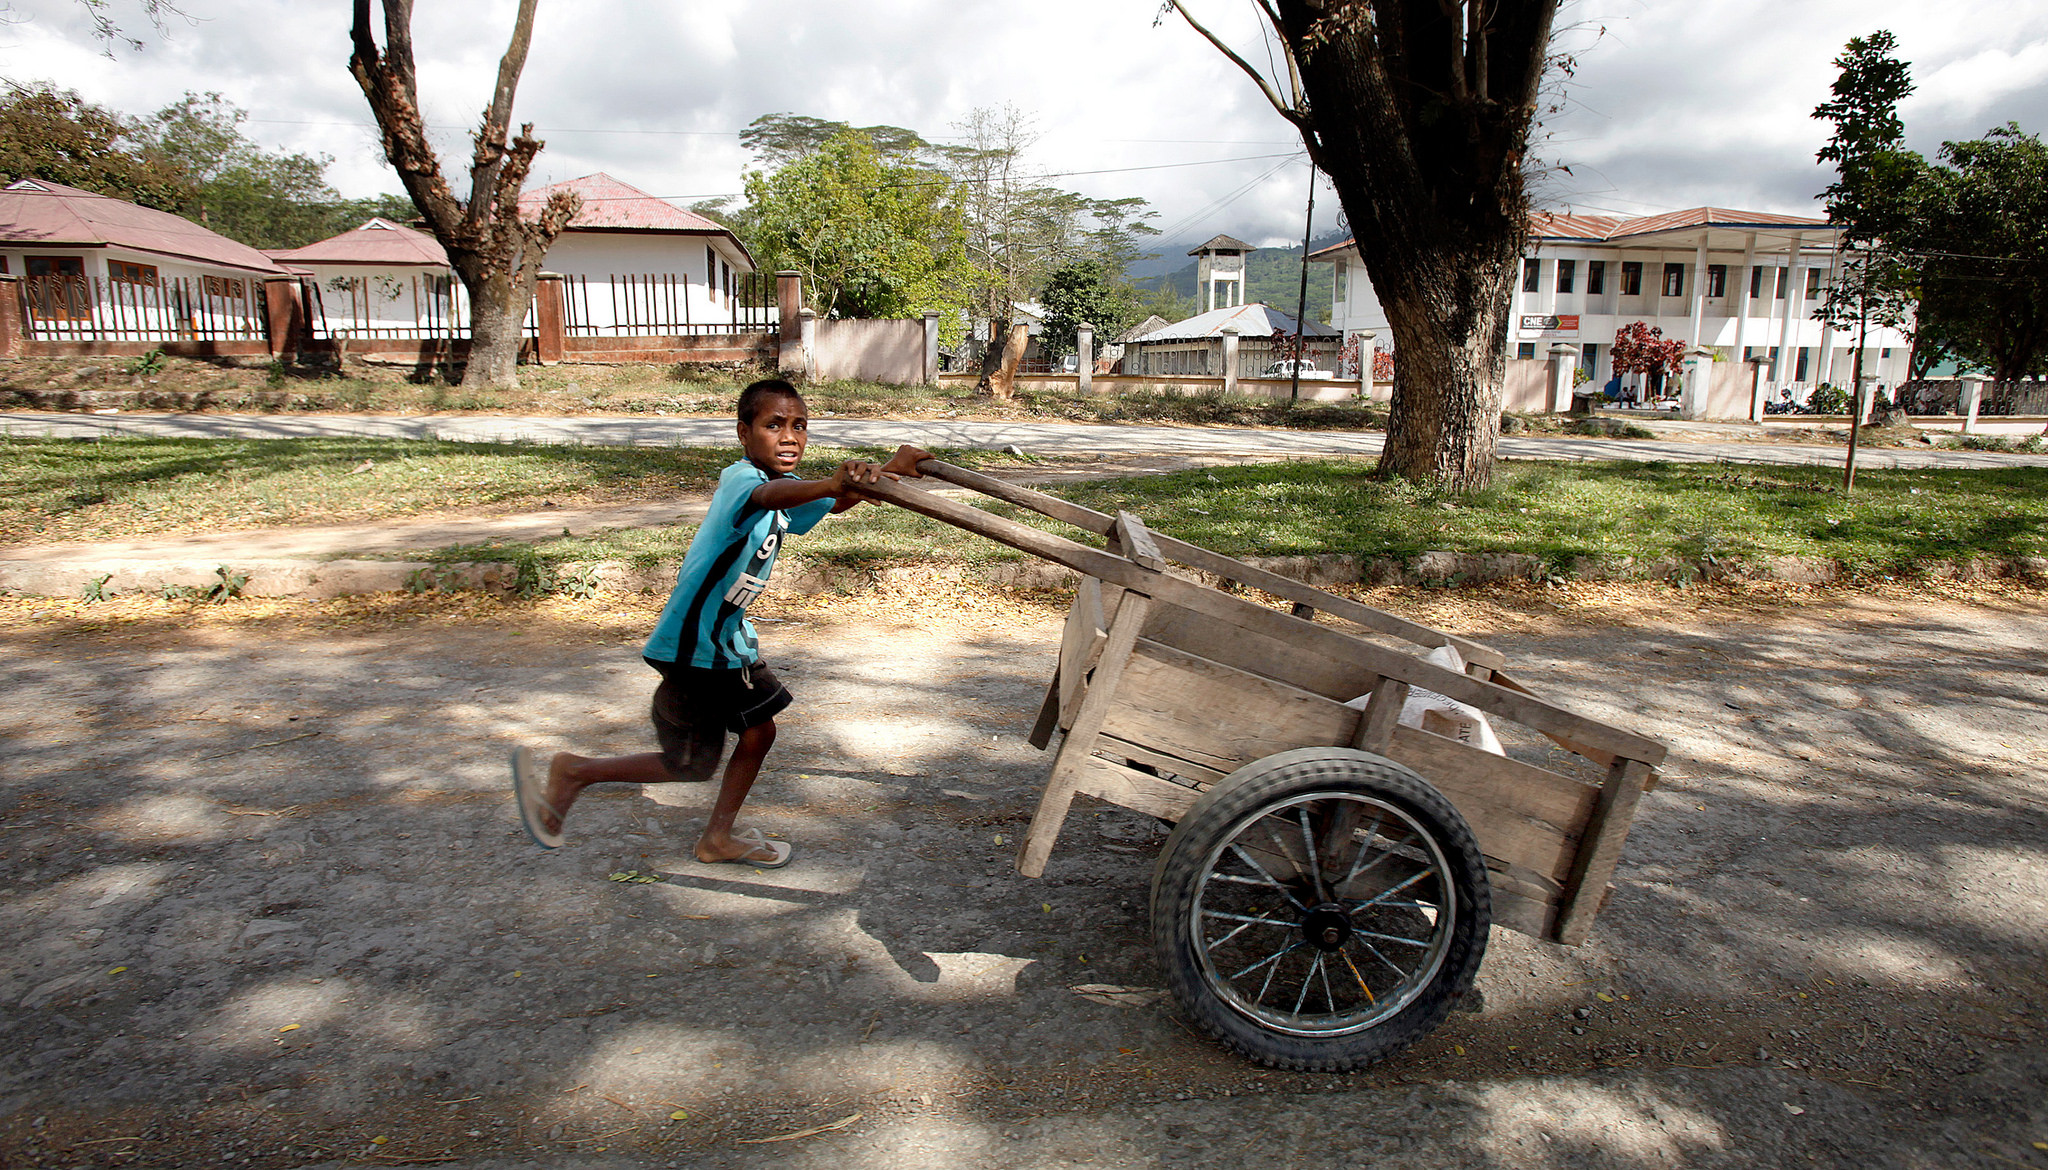 Boy pushes a cart on the streets of Talimoro, Dili, Timor-Leste (Asian Development Bank/Flickr/CC BY-NC-ND 2.0)